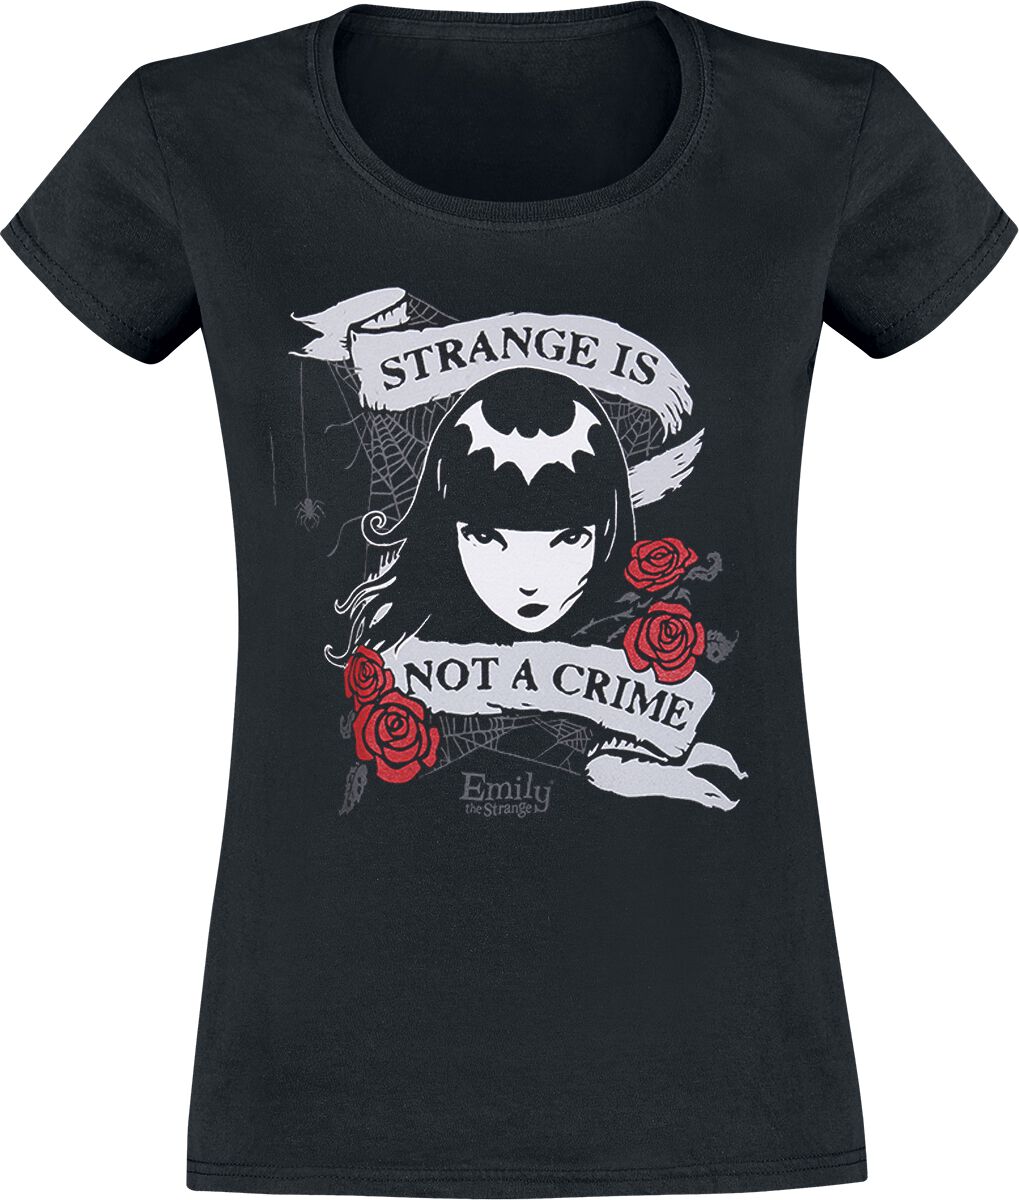 Image of T-Shirt Rockabilly di Emily the Strange - Not a crime - L a XL - Donna - nero